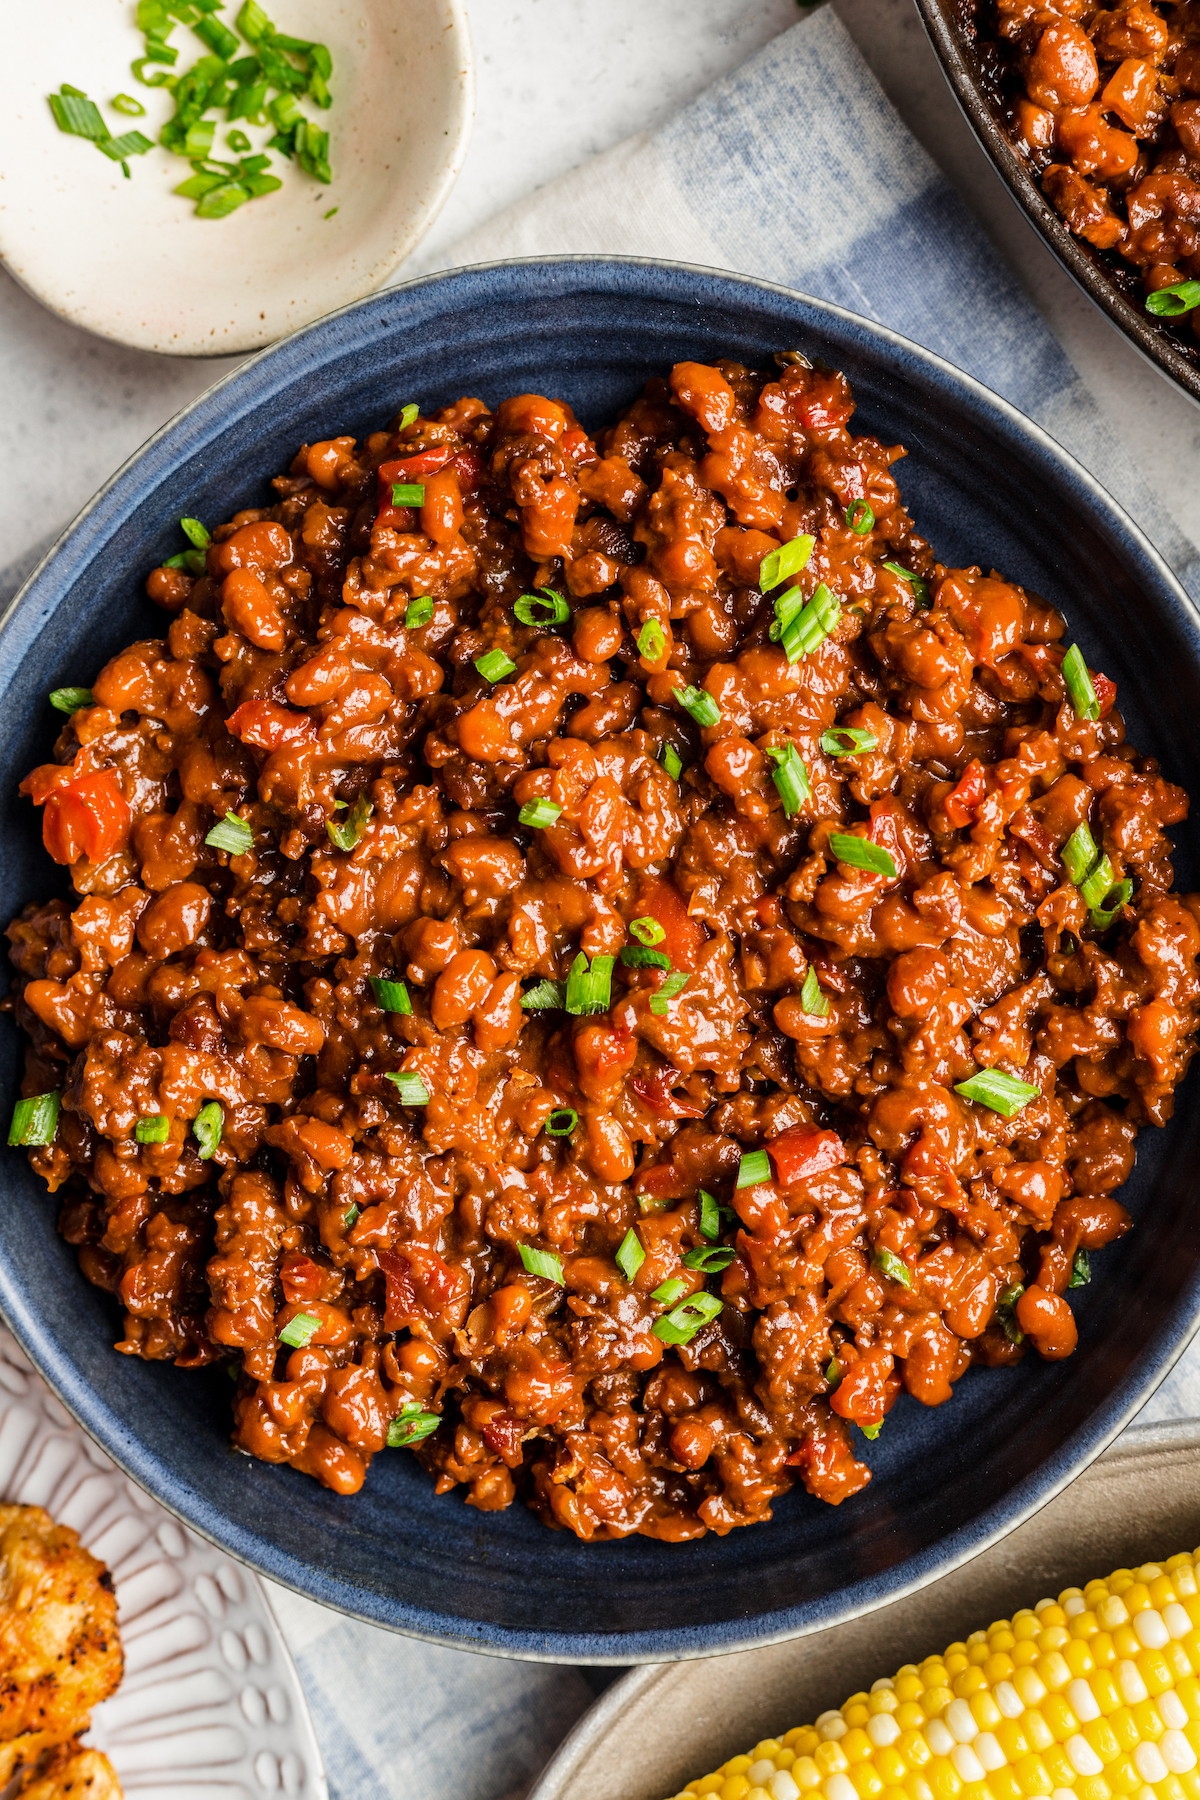 A skillet of homemade baked beans topped with chopped green onion.